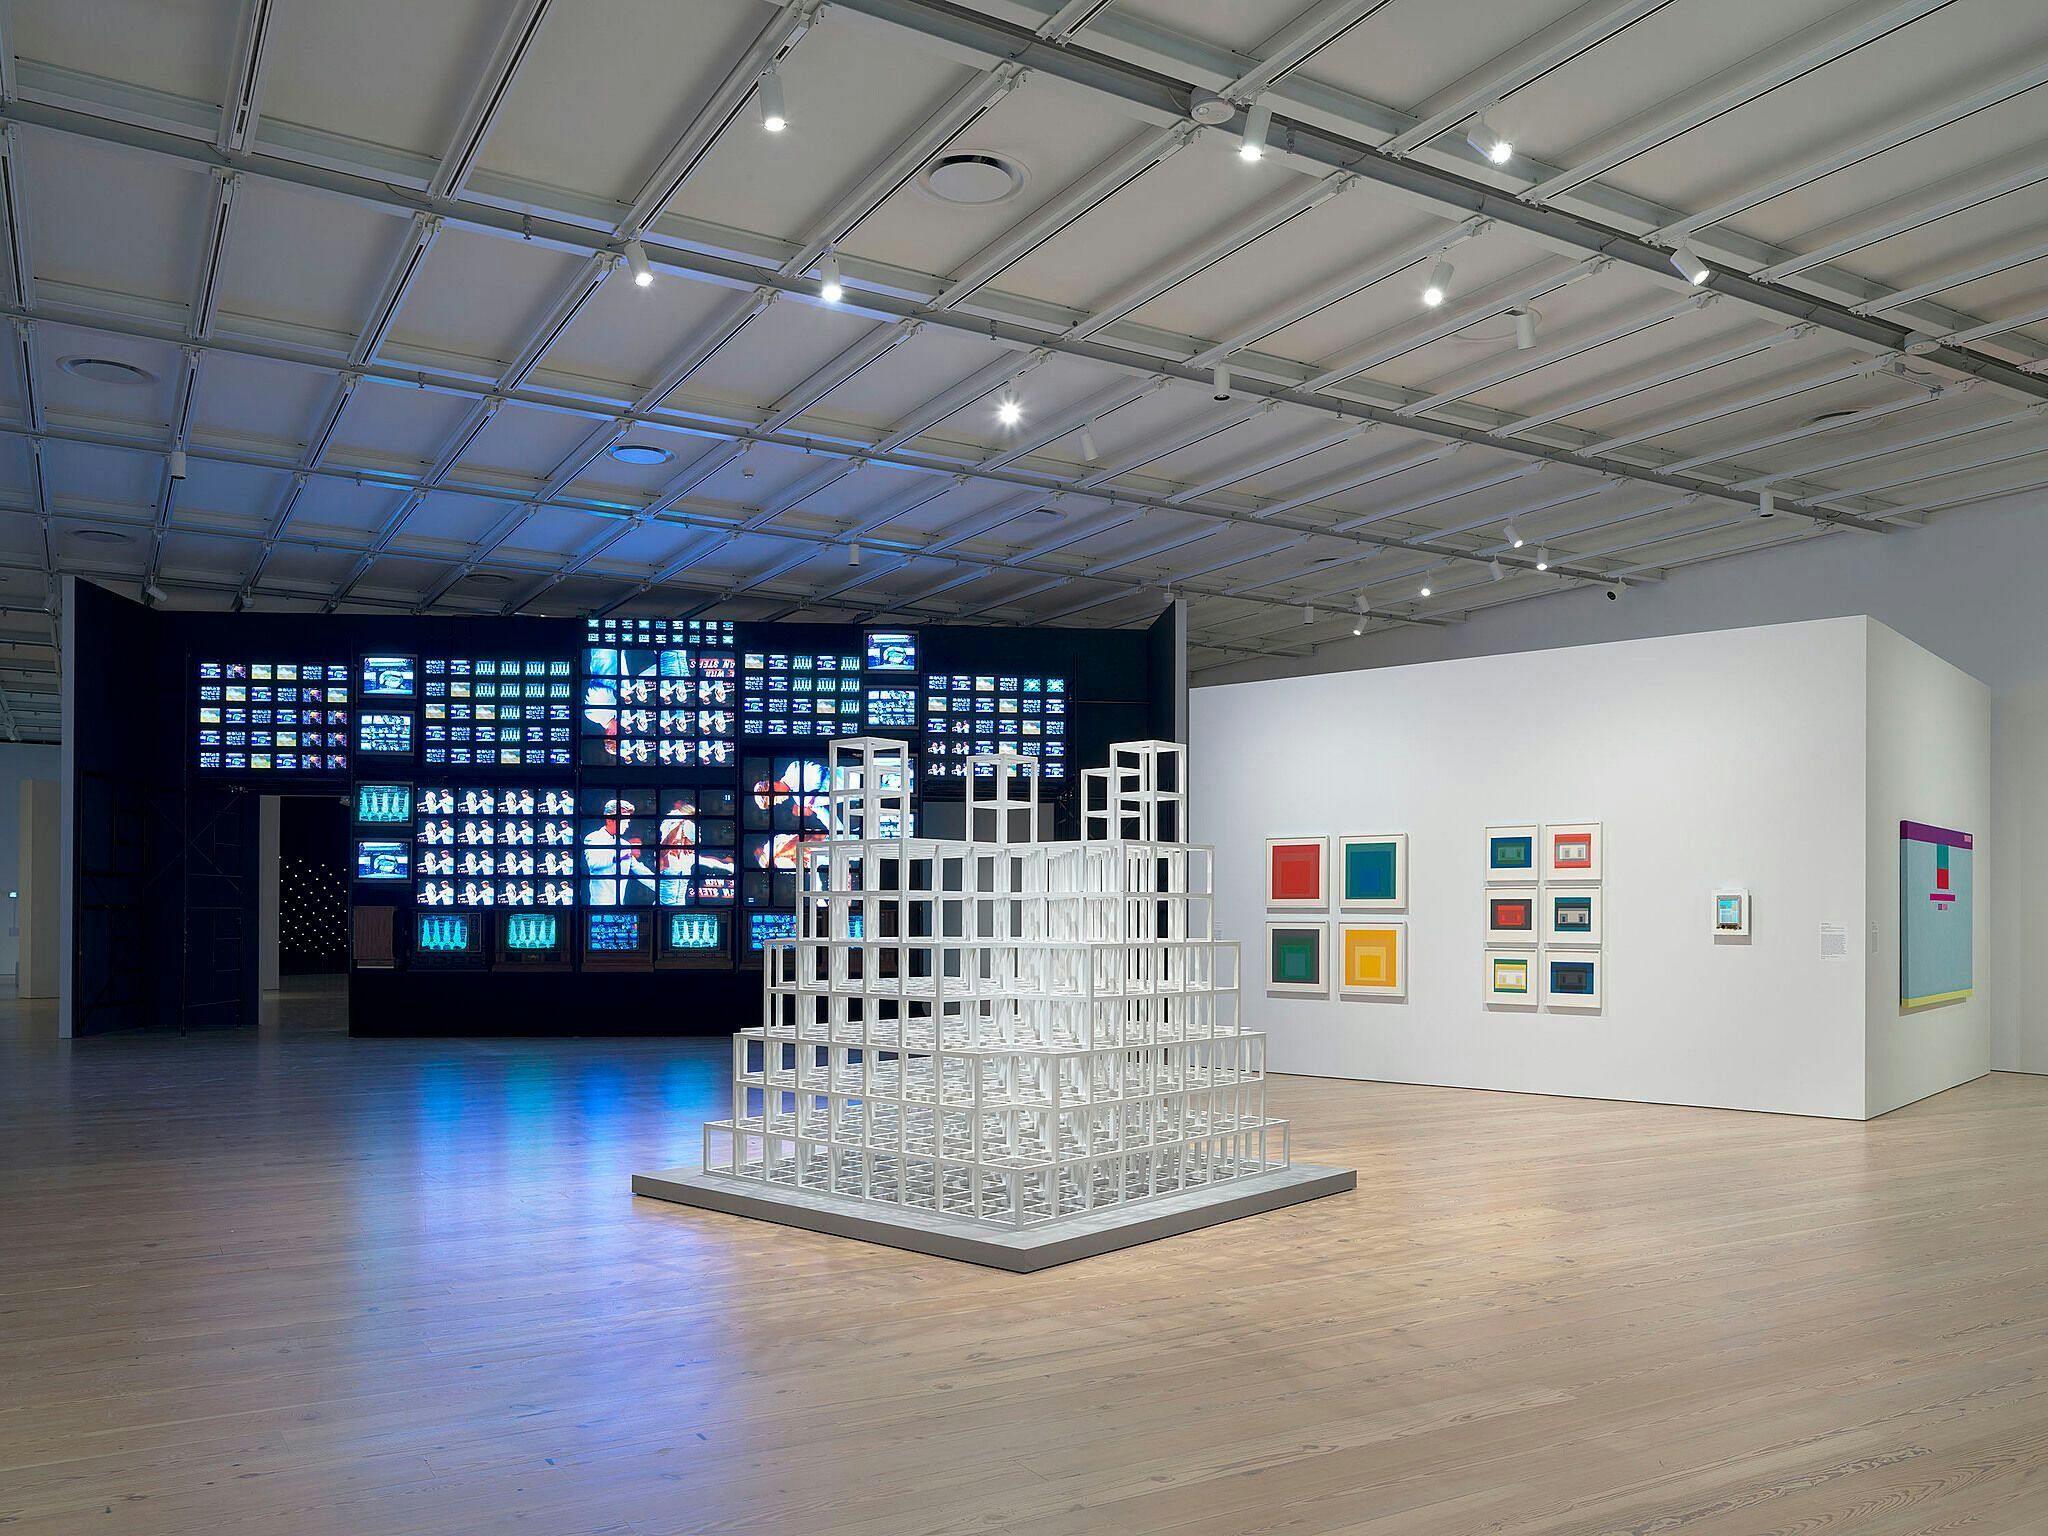 An installation view featuring works by Josef Albers in Programmed: Rules, Codes, and Choreographies in Art, 1965–2018 at the Whitney Museum of American Art in New York, dated 2018